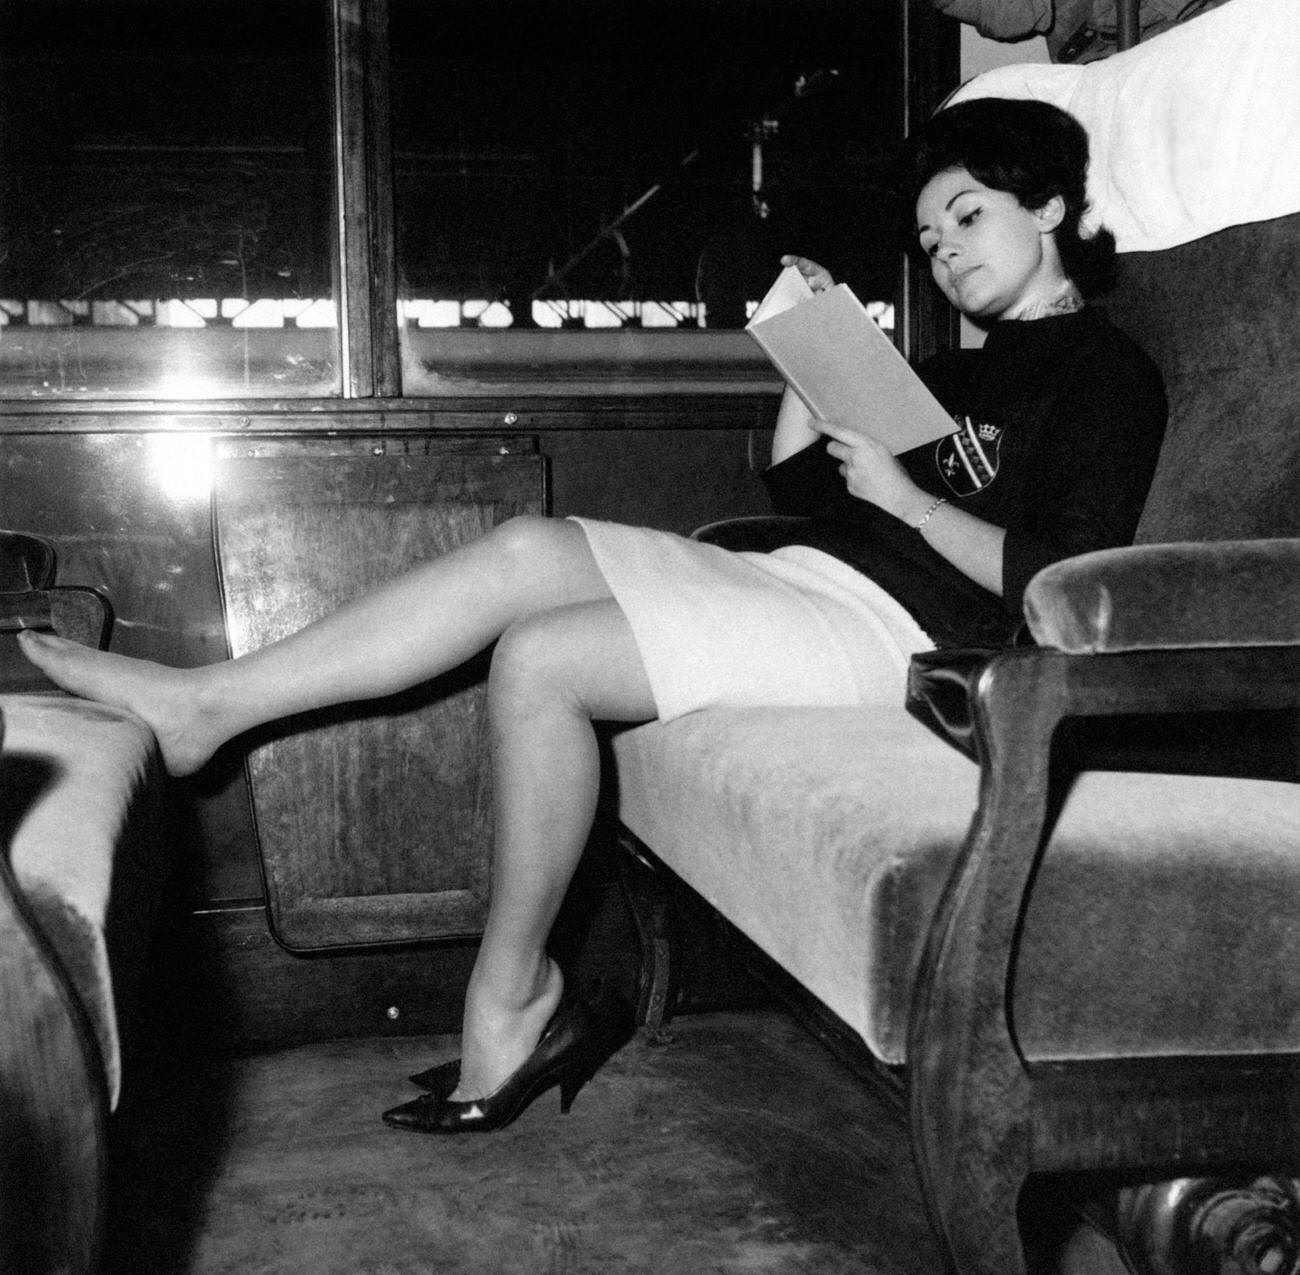 Italian miss Giuliana Copreni reading a book in a train carriage resting her feet on the seat.